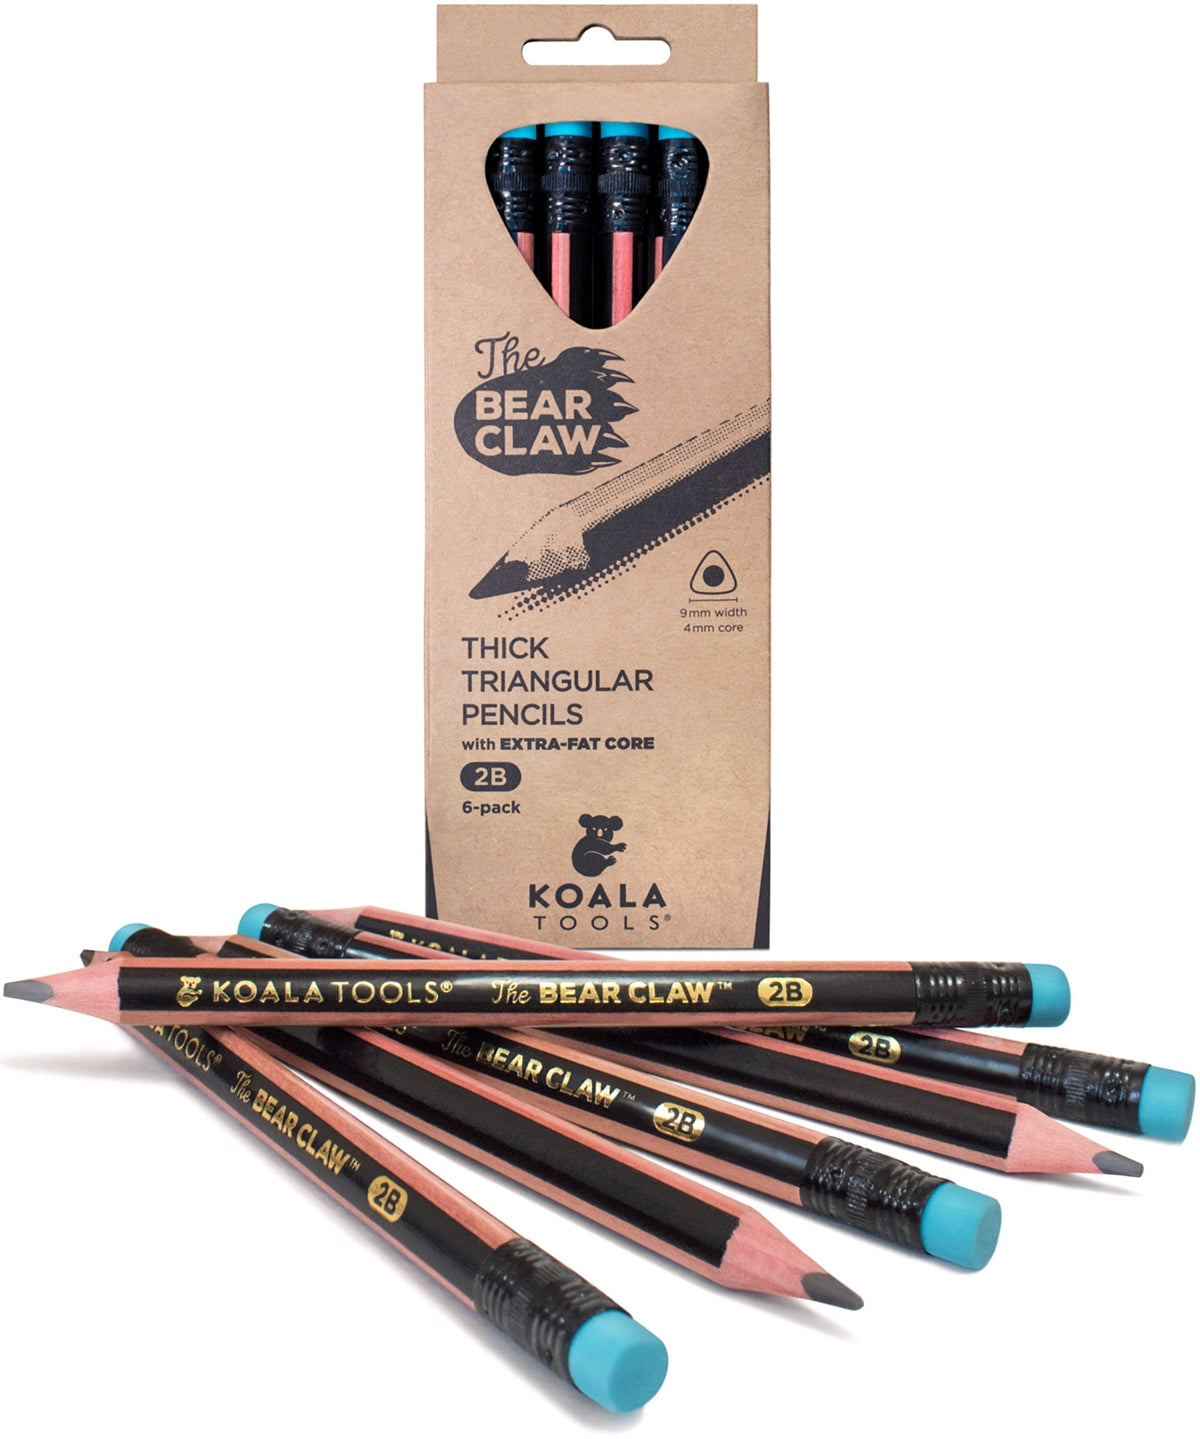 Koala Tools - Bear Claw Colored Pencils for Adults and Kids, Water Soluble Color Pencils with Triangular Grip for Art and Shading, Large Coloring